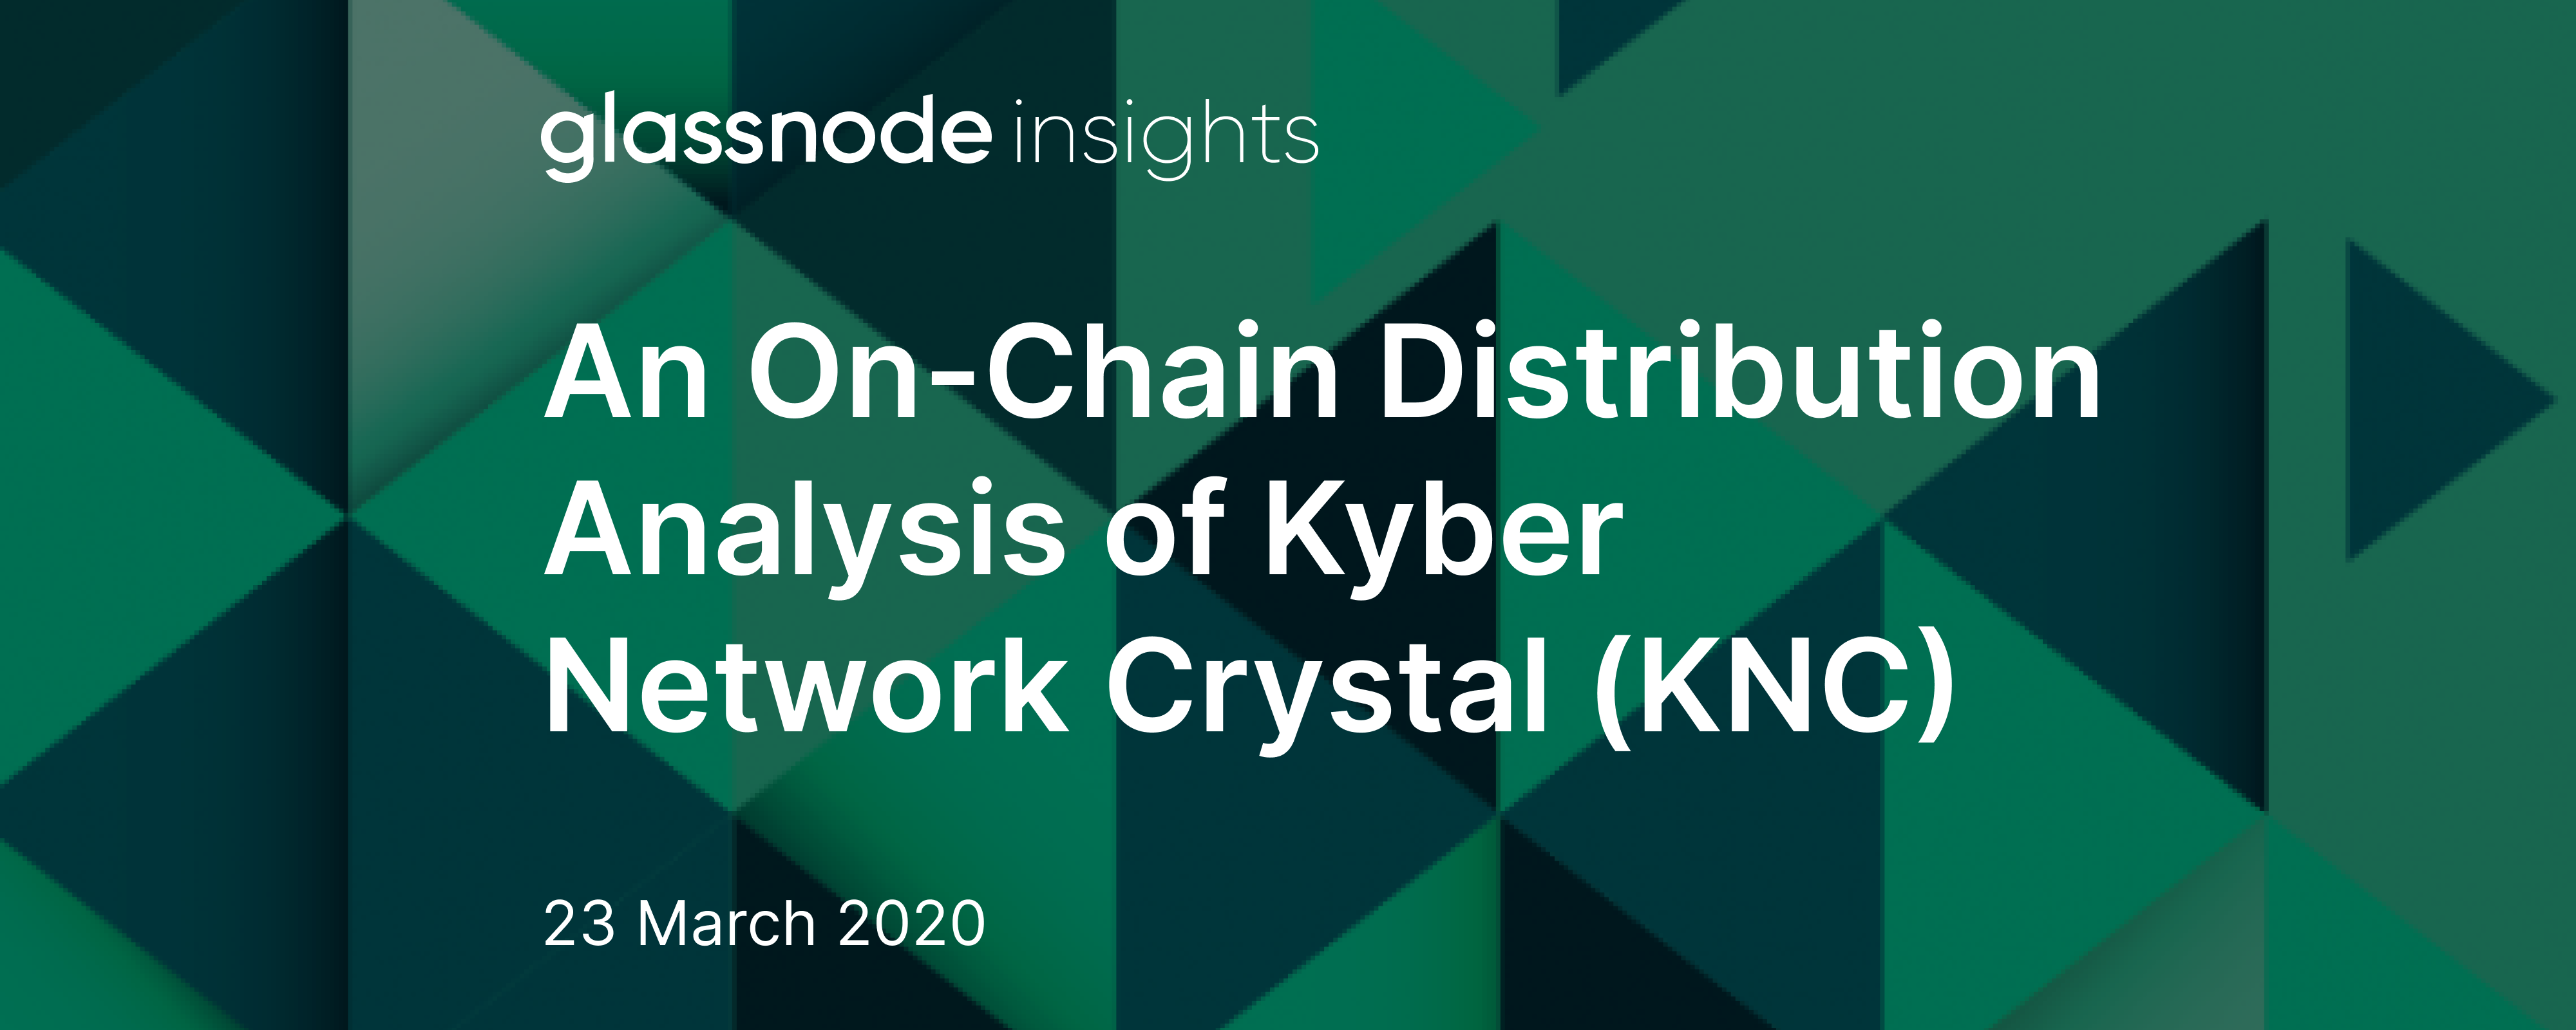 An On-Chain Distribution Analysis of Kyber Network Crystal (KNC)